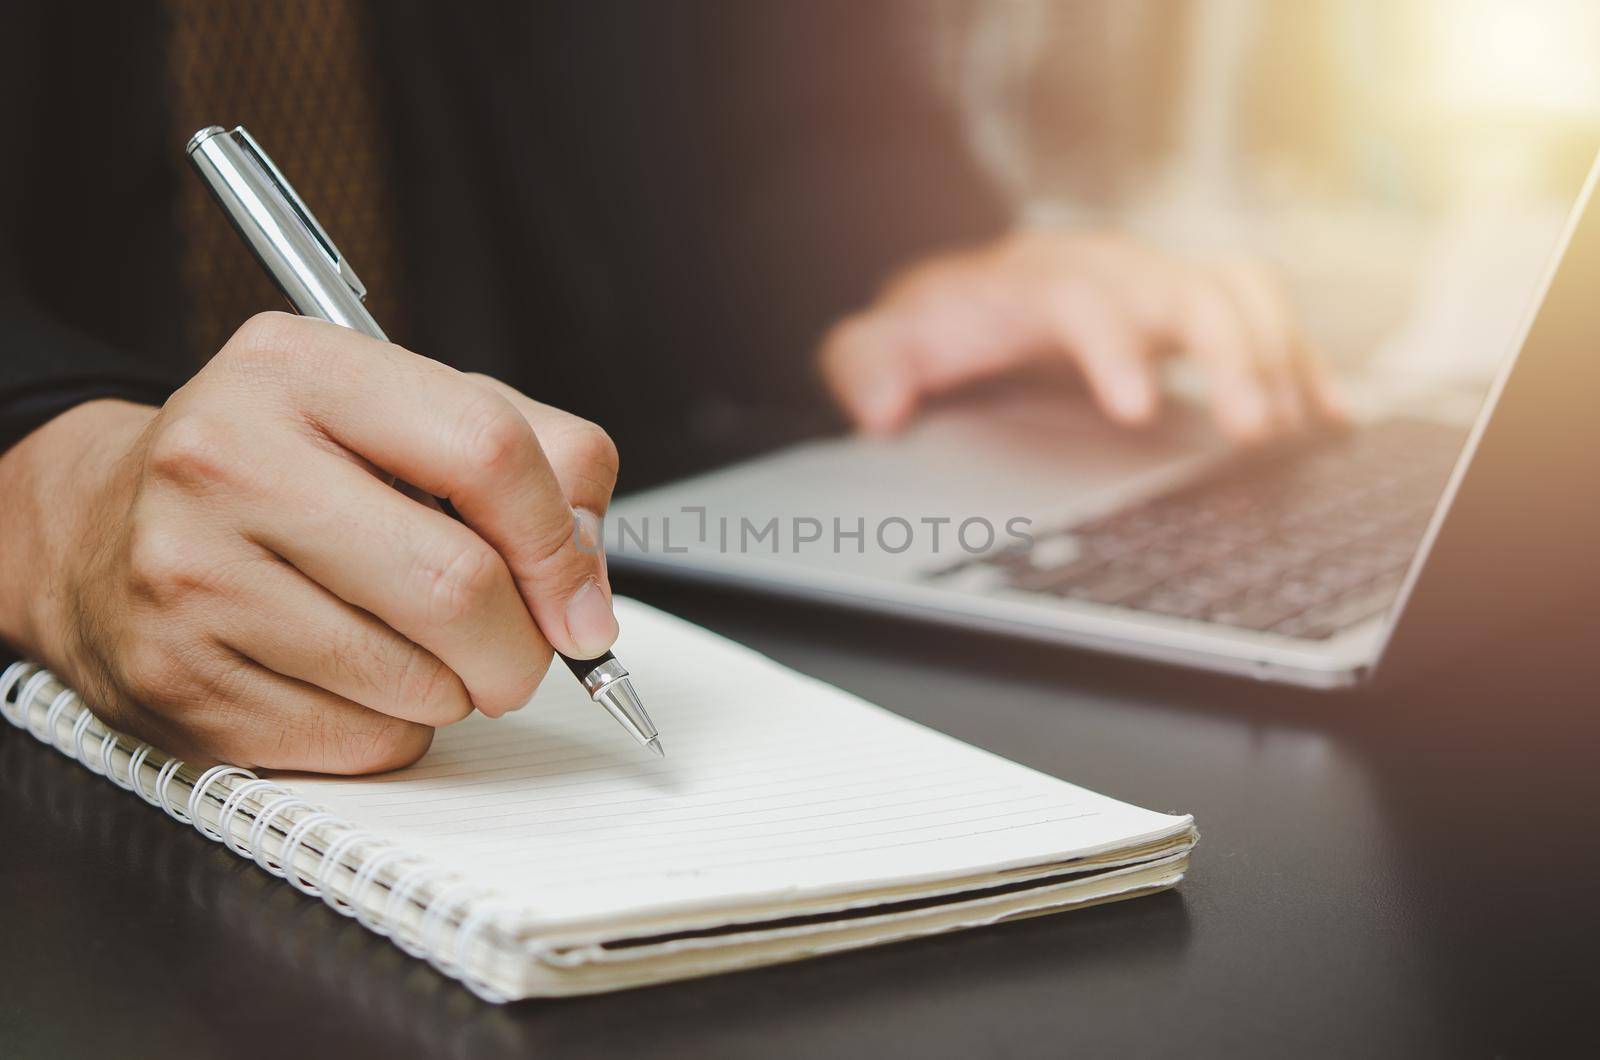 person man holding pen write plan or idea on book with computer laptop on desk.